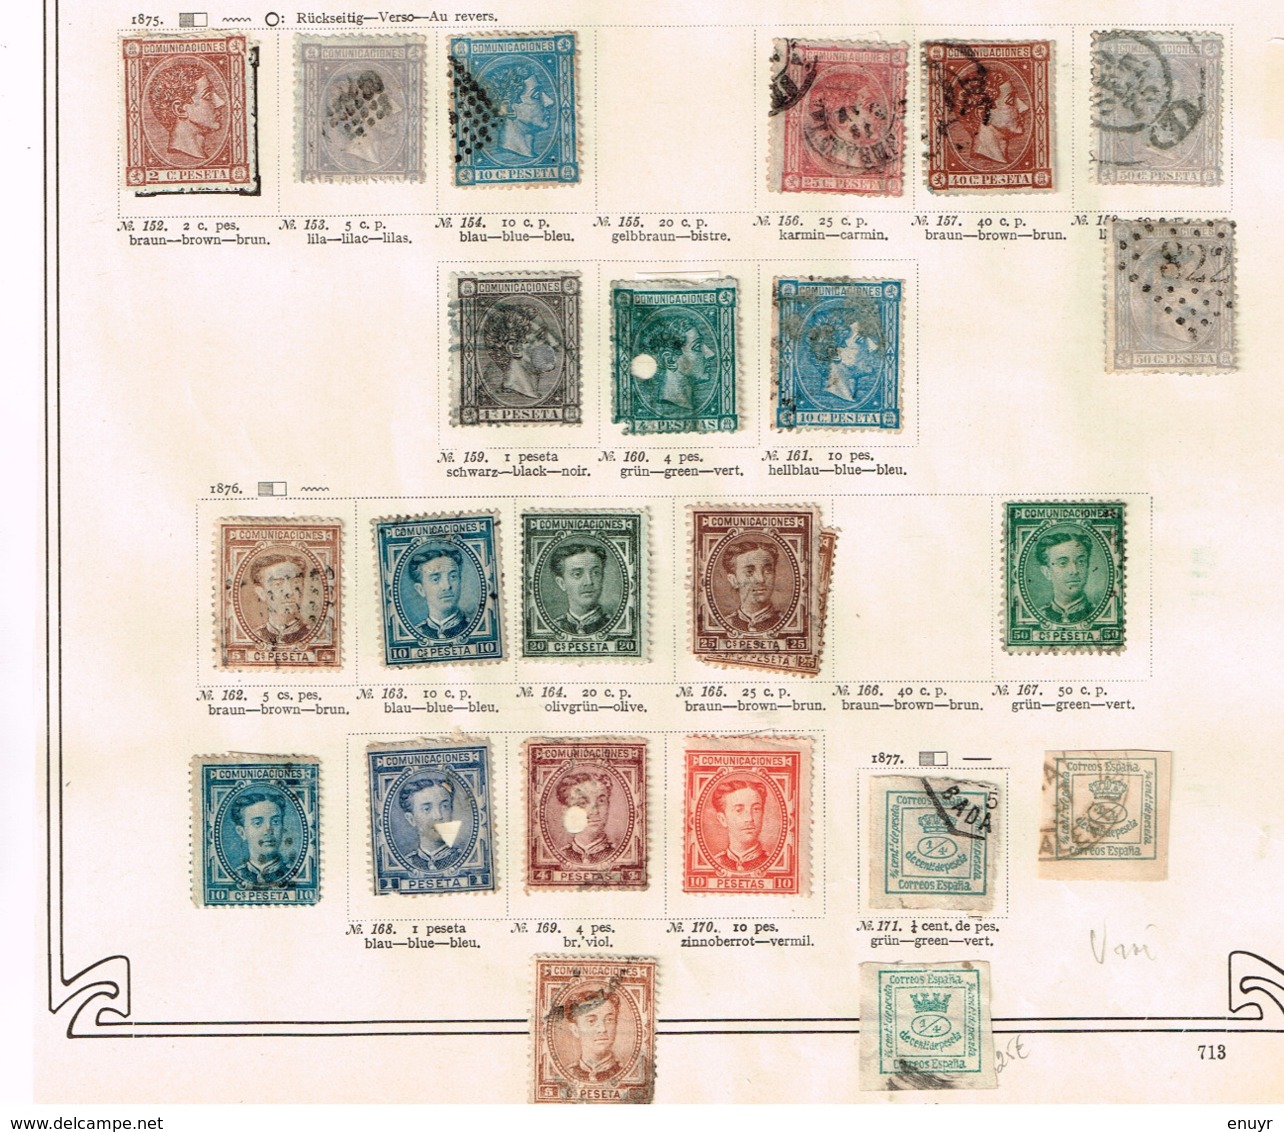 Espagne + colonies. Ancienne collection. Old collection. Altsammlung. Oude verzameling